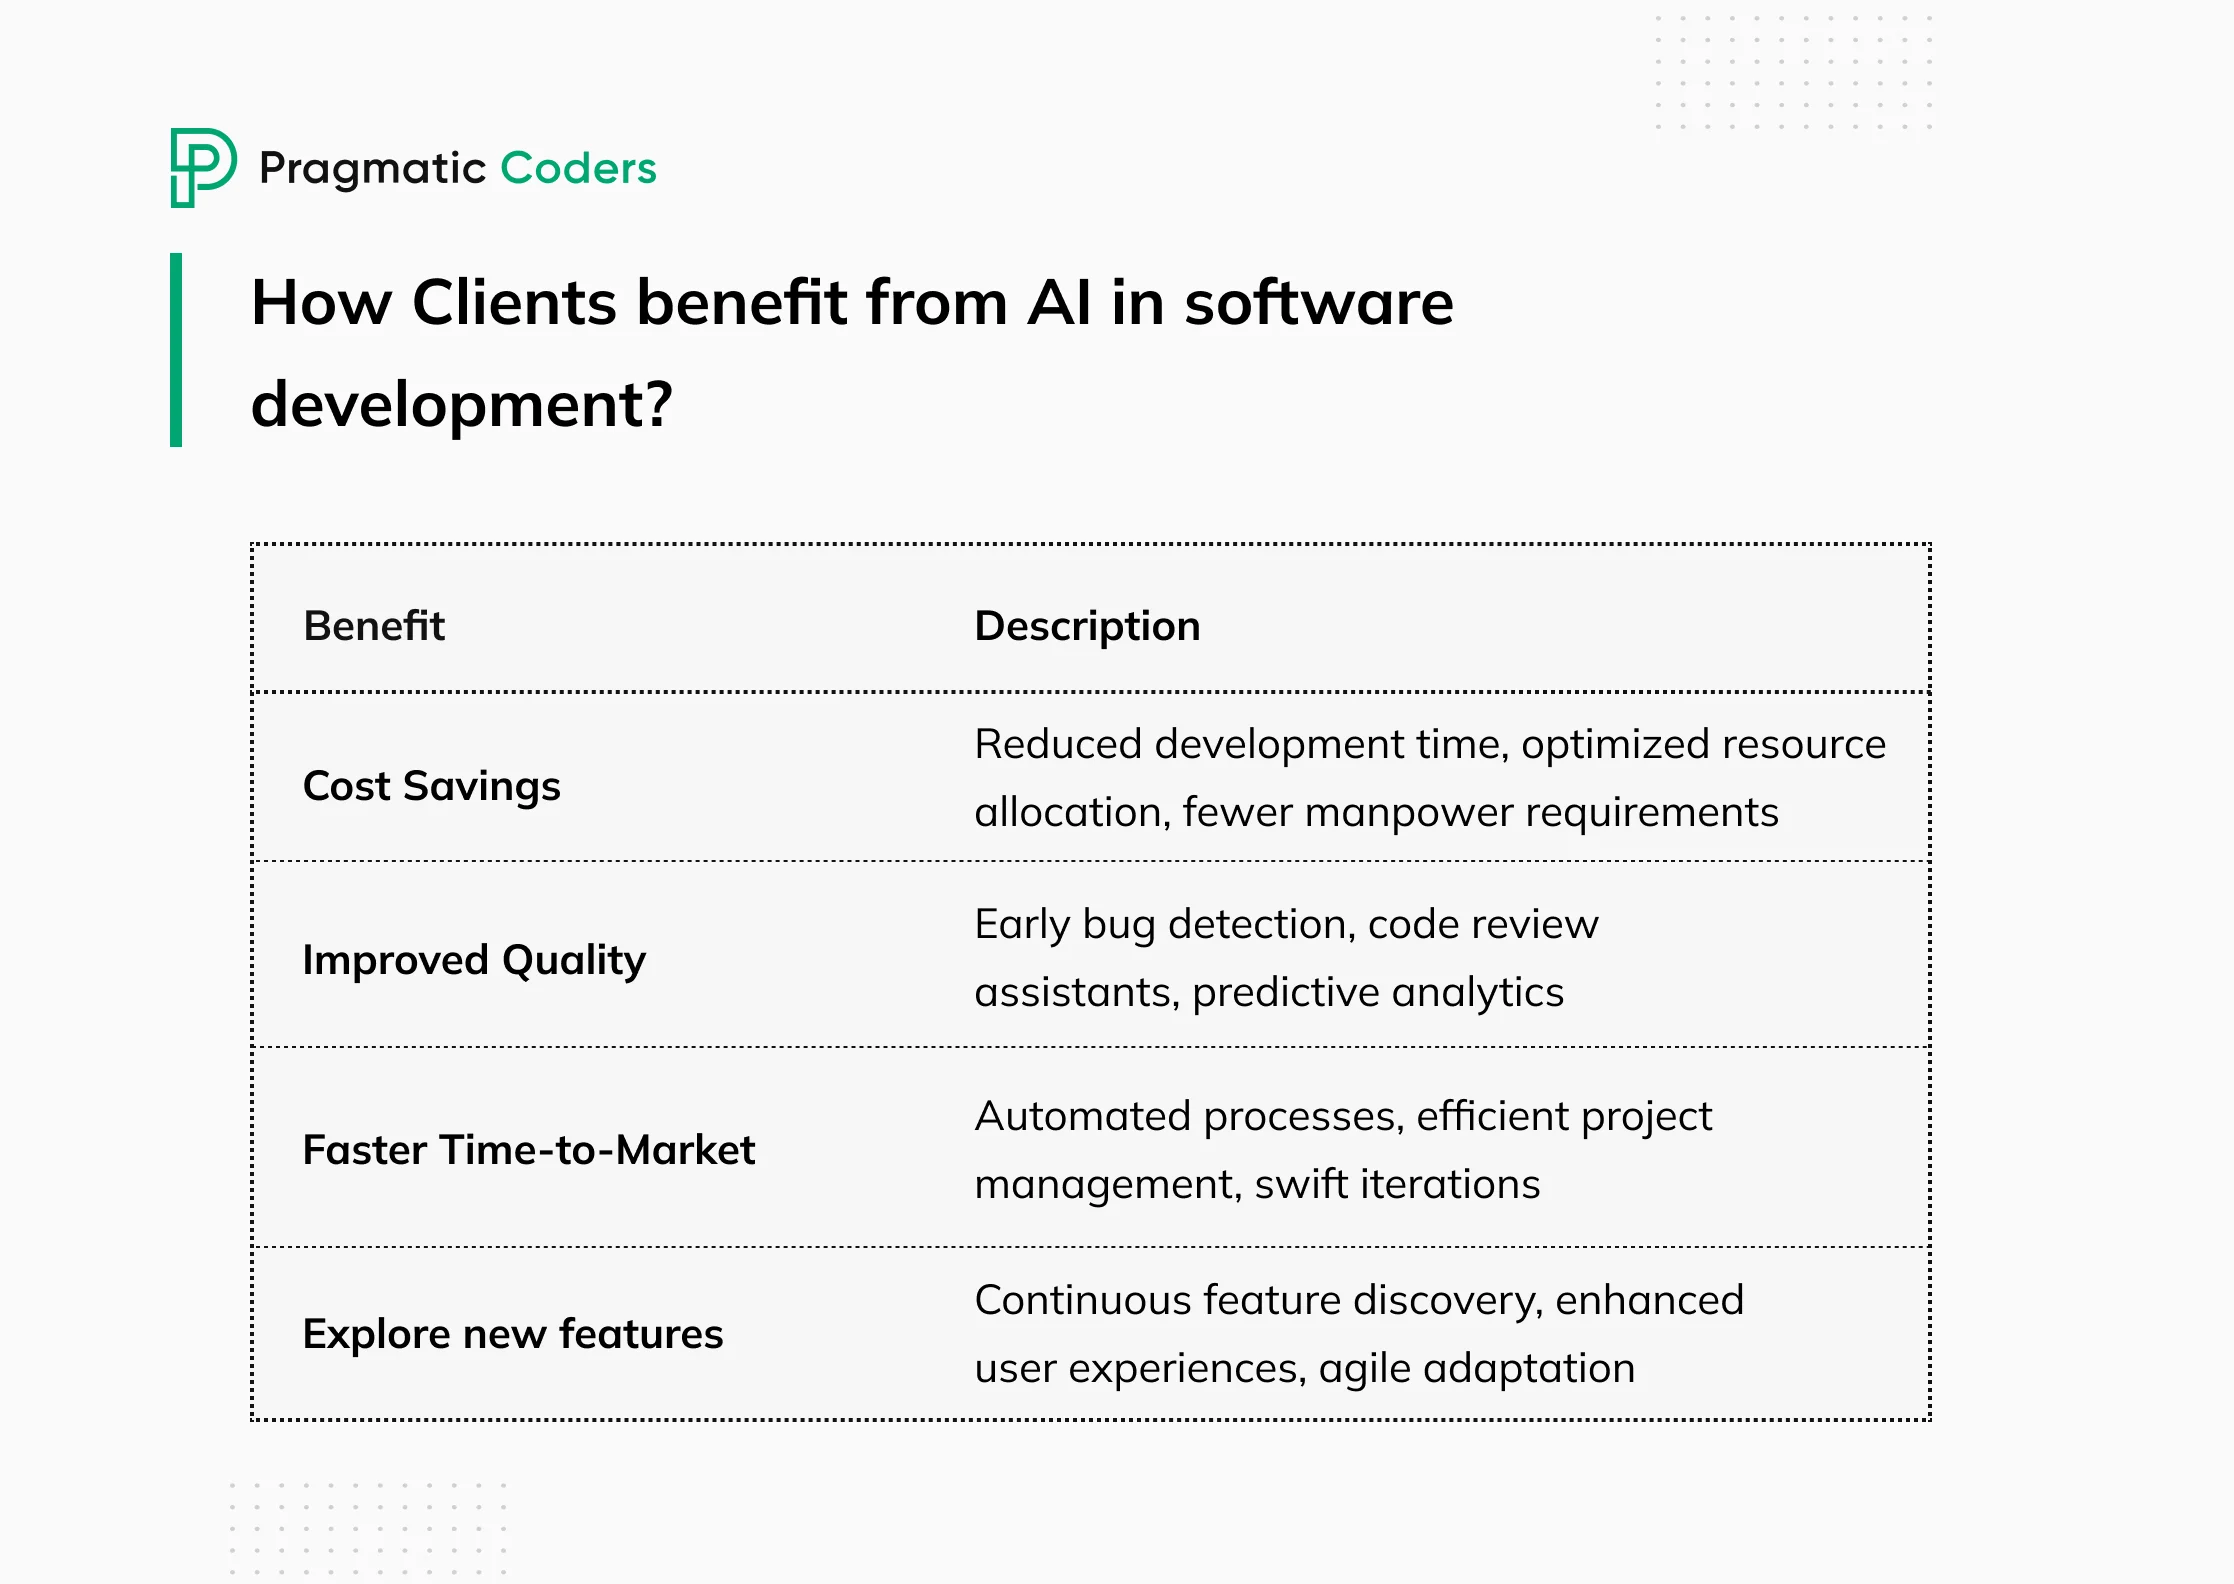 How Clients benefit from AI in software development?